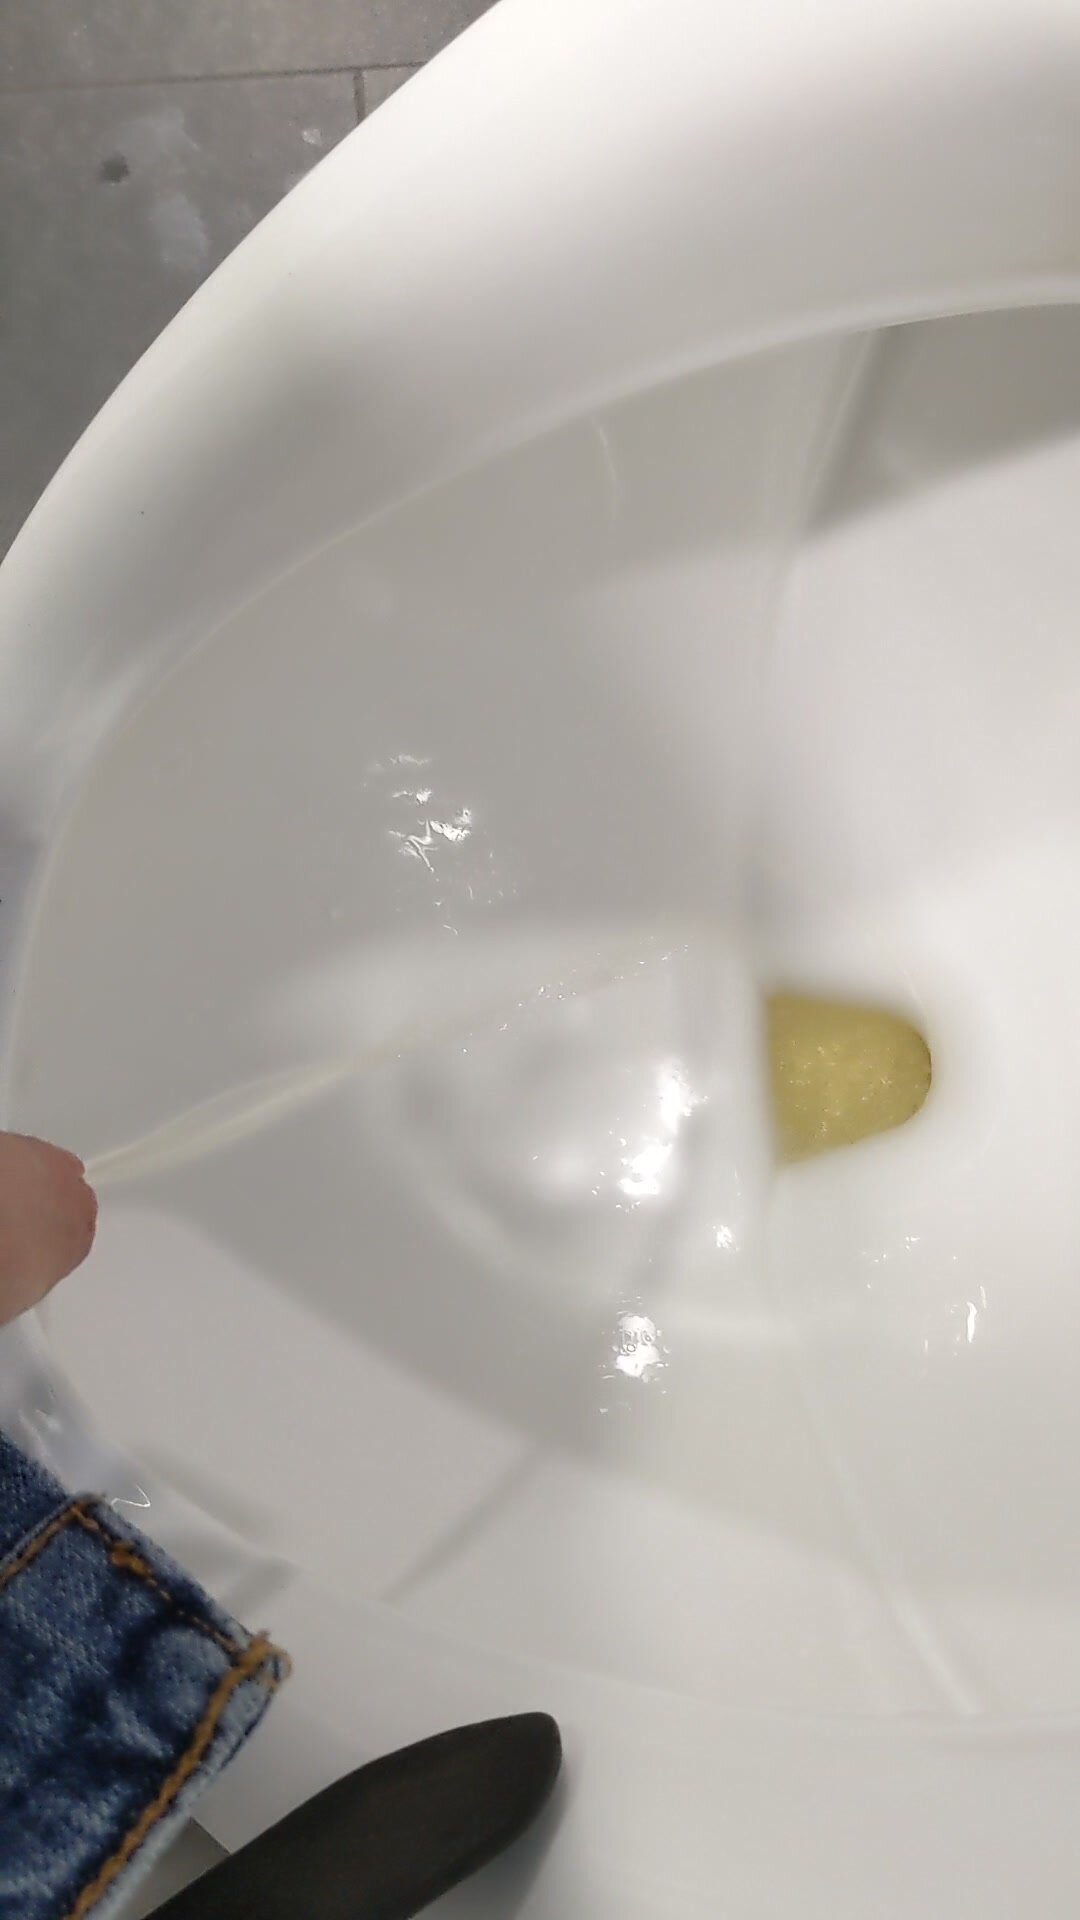 pissing in urinal - video 2